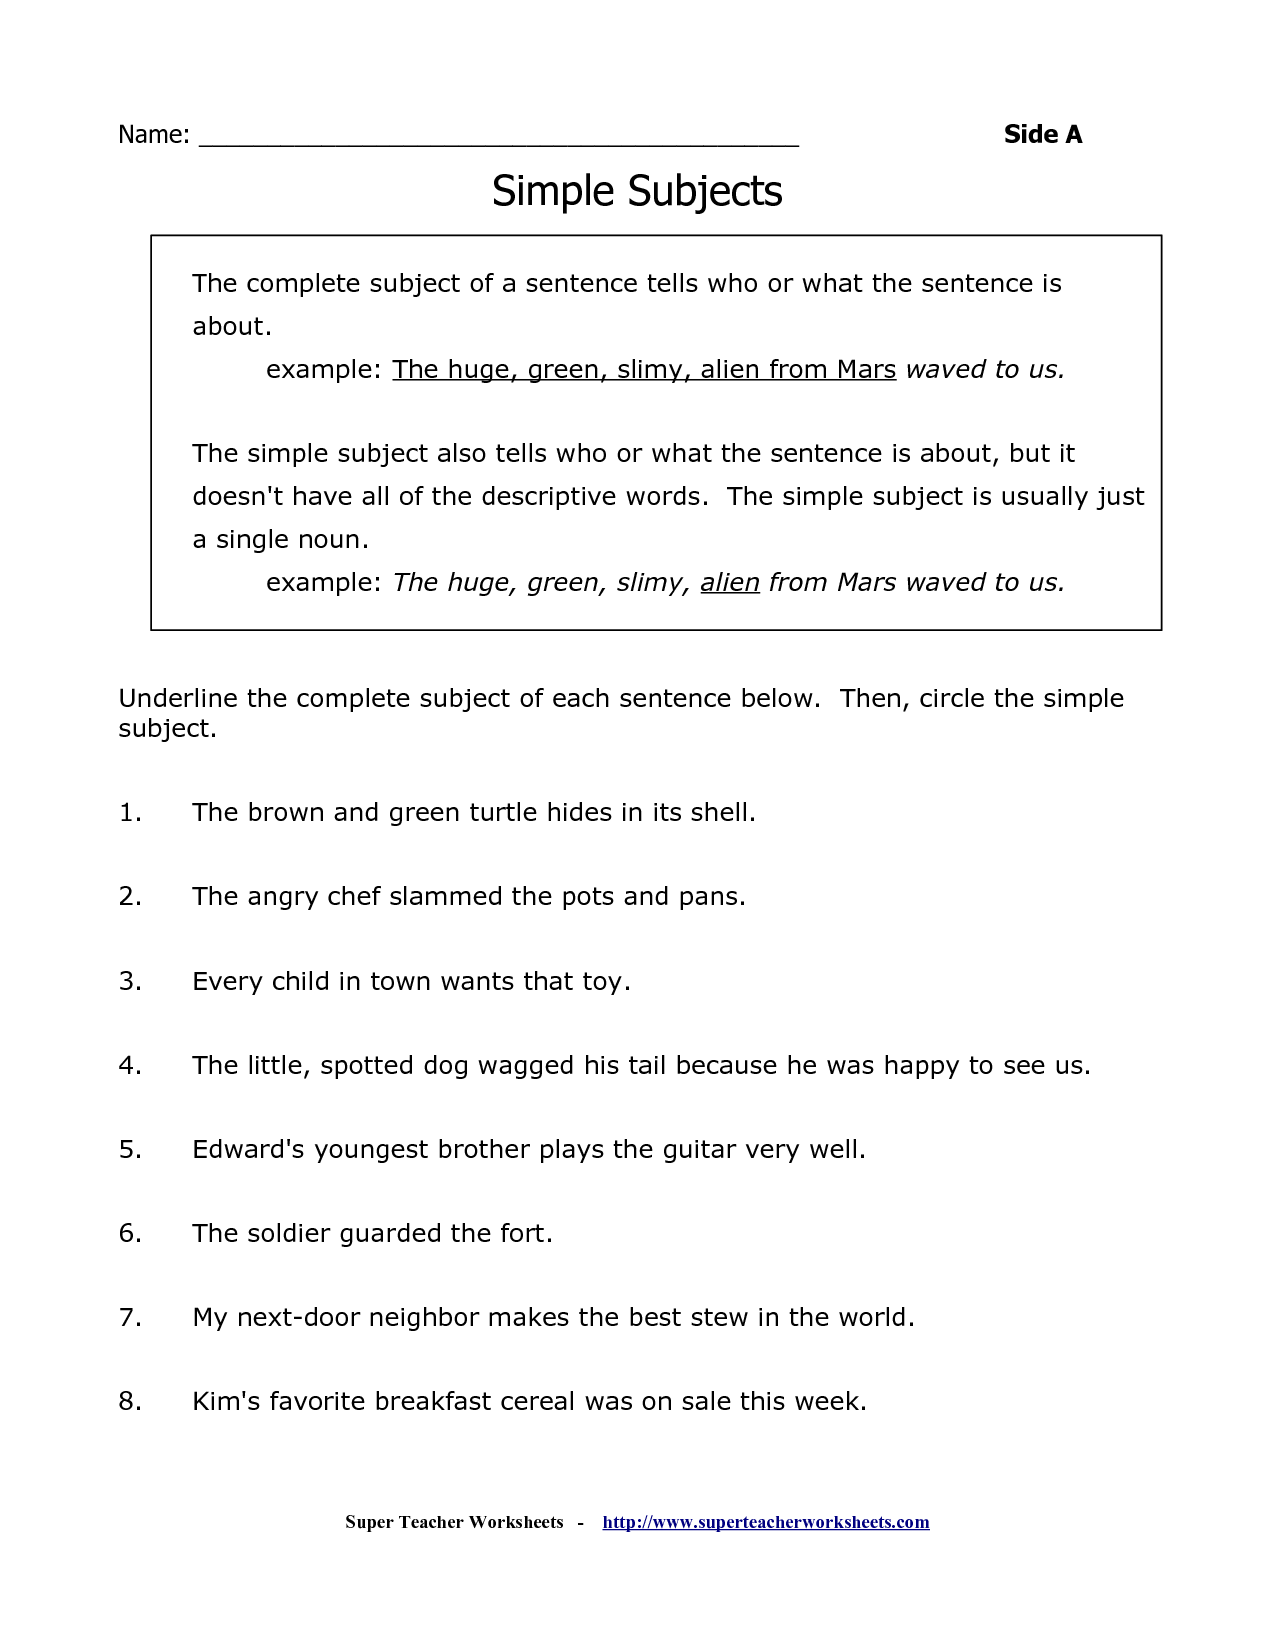 17-best-images-of-worksheets-circle-subject-underline-the-subject-and-predicate-the-simple